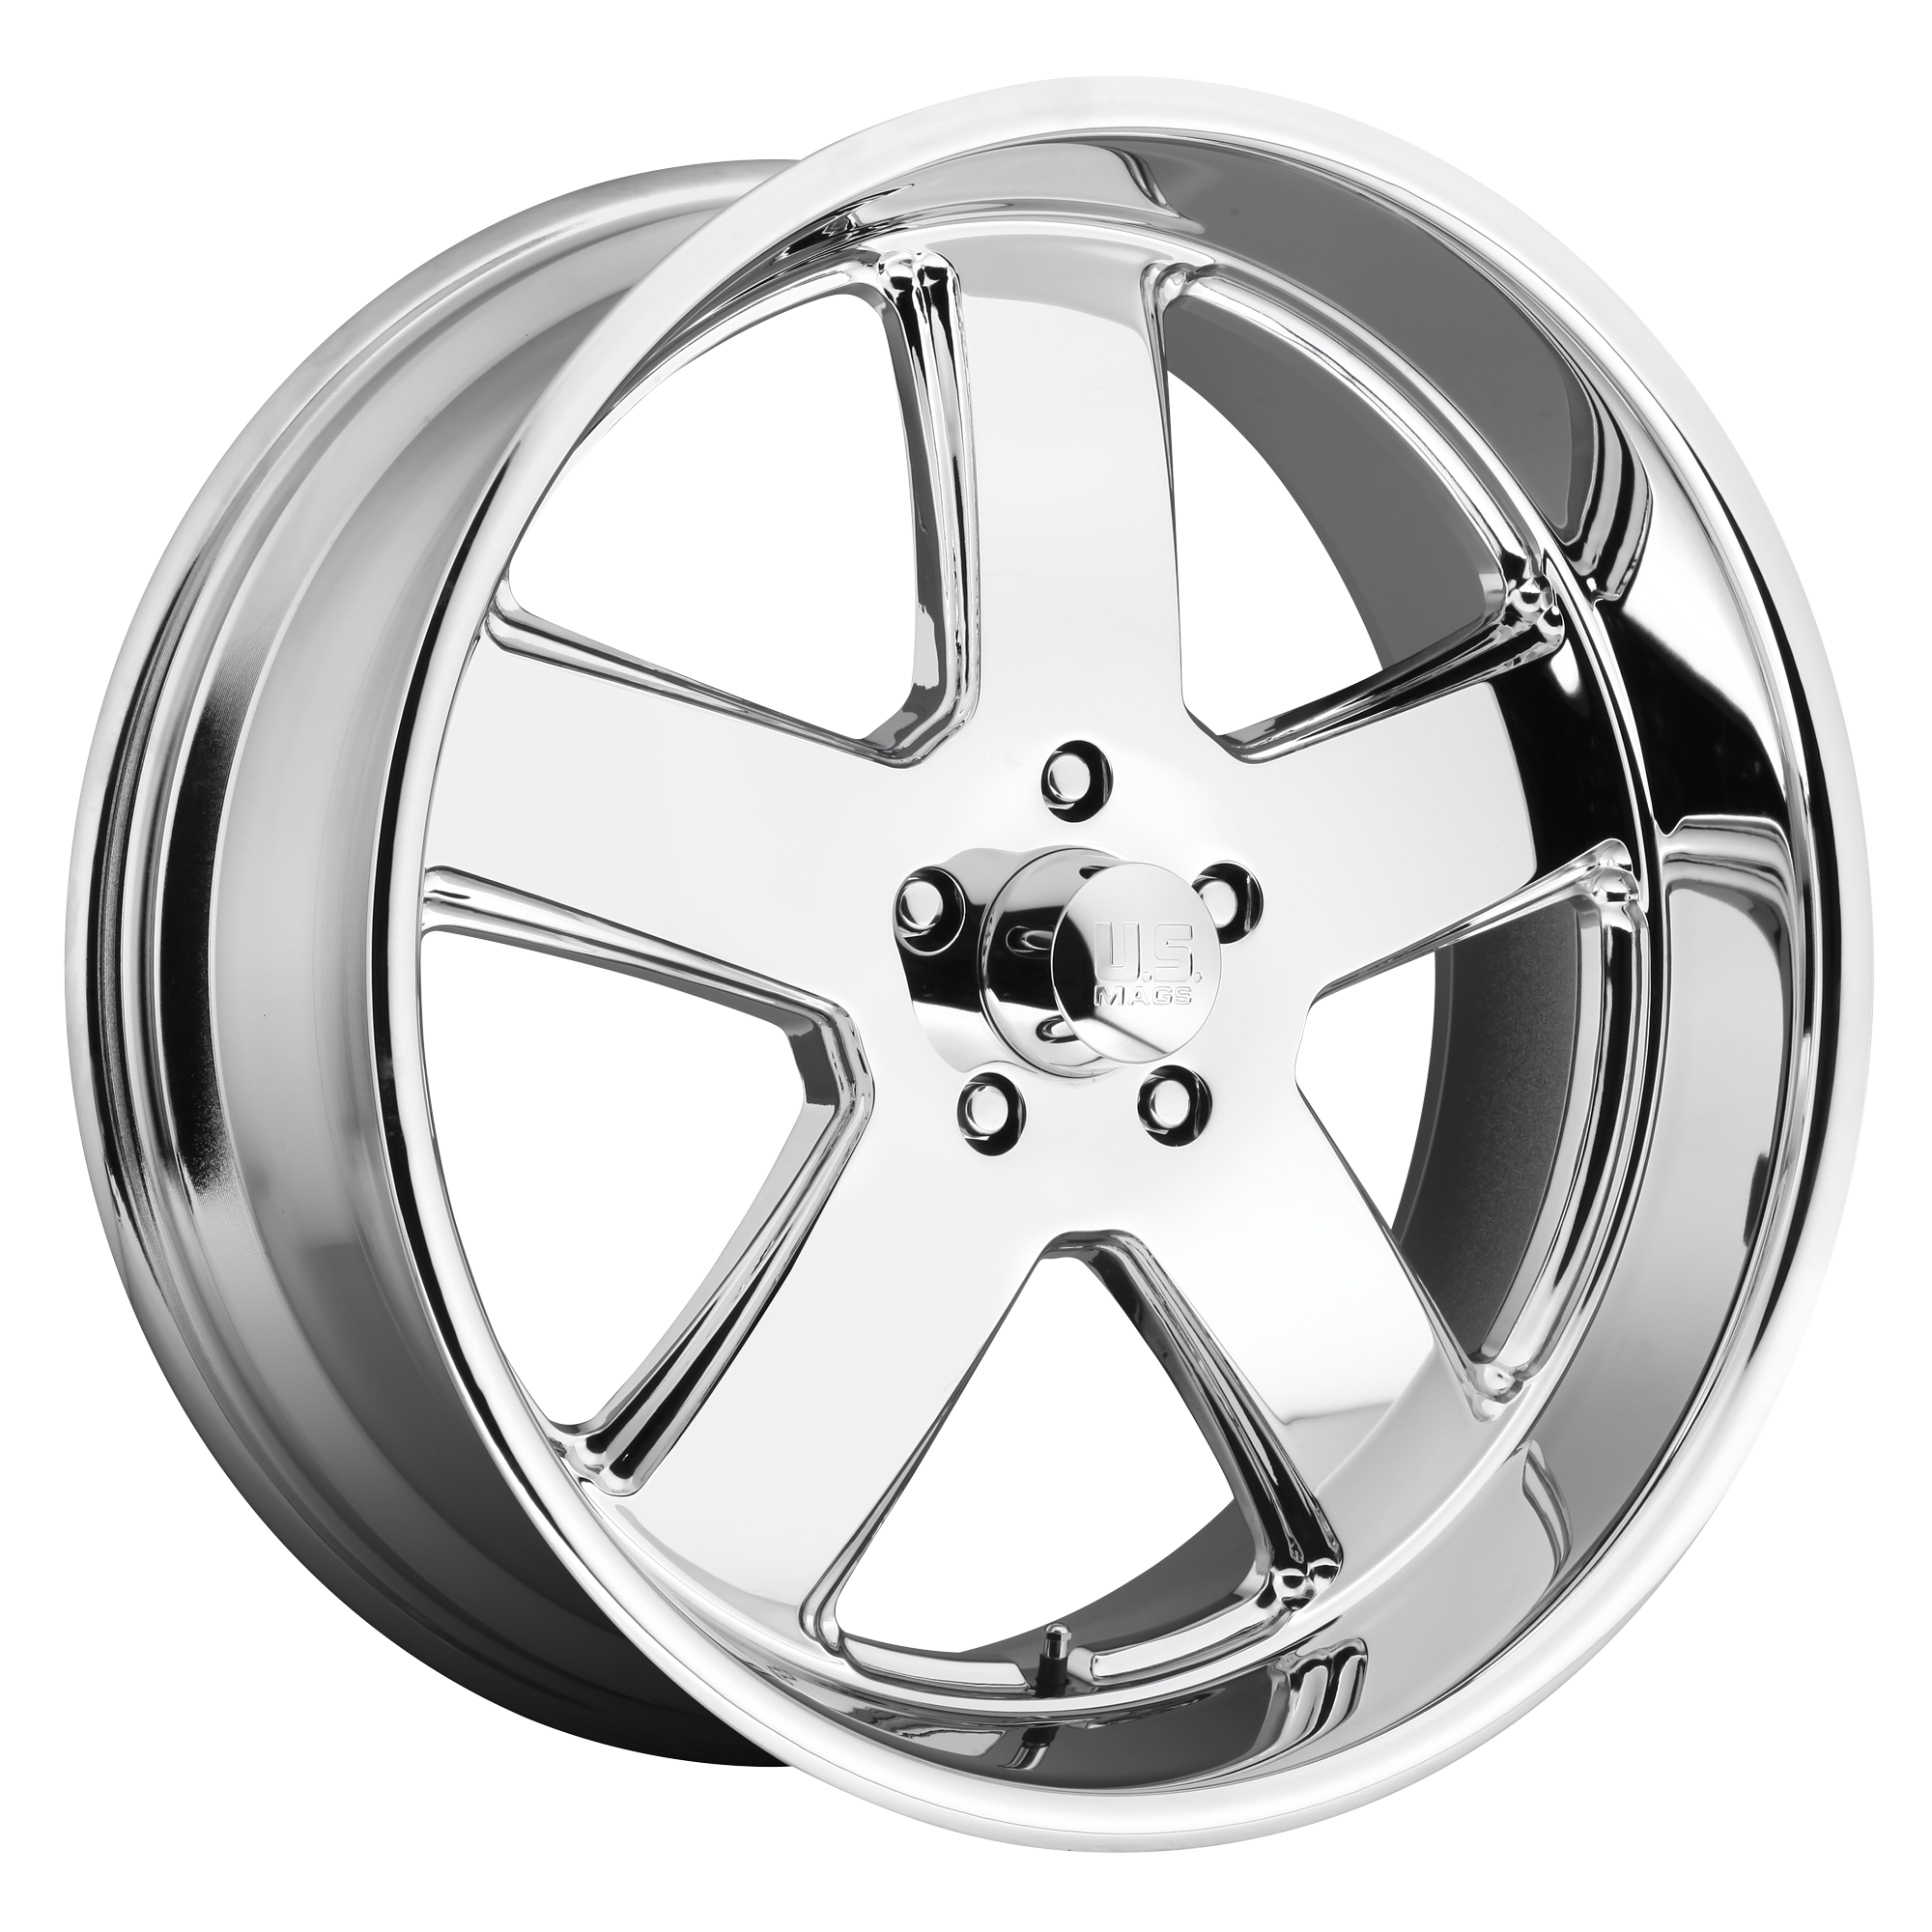 HUSTLER 22x11 5x127.00 CHROME PLATED (18 mm) - Tires and Engine Performance